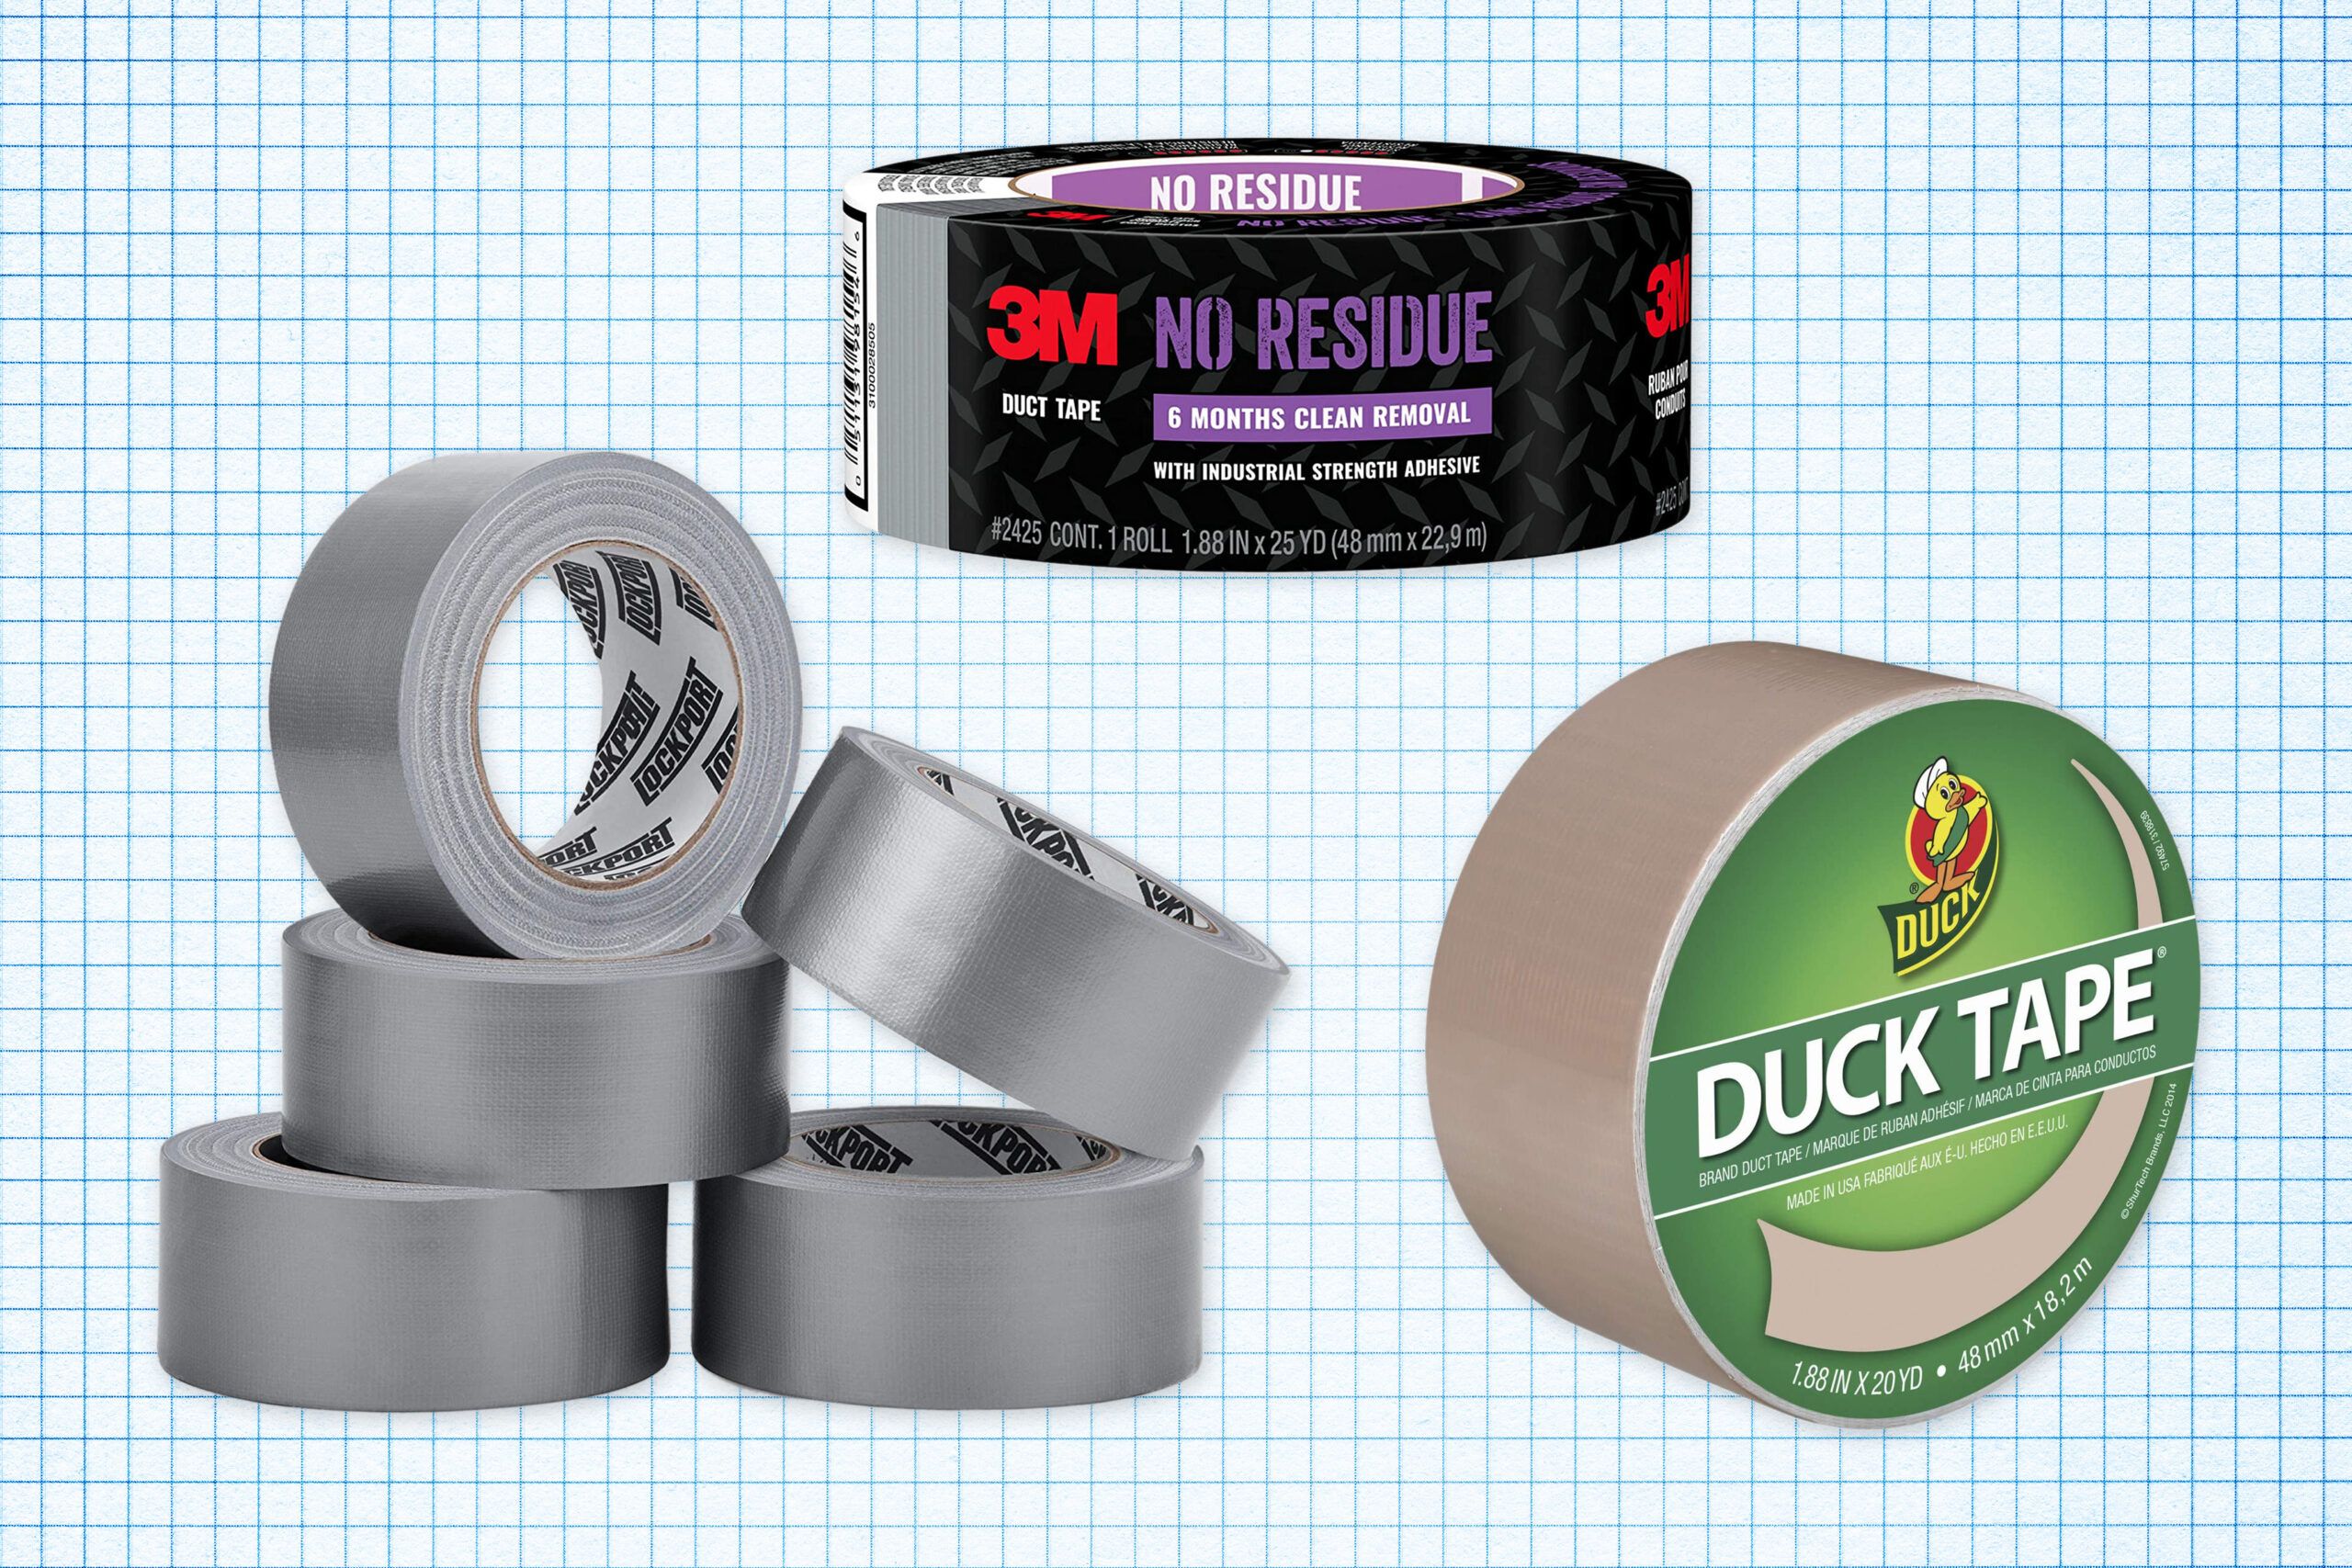 Lockport Duct Tape, Duck Duct Tape, and 3M Duct Tape isolated on a white grid paper background with blue stripes